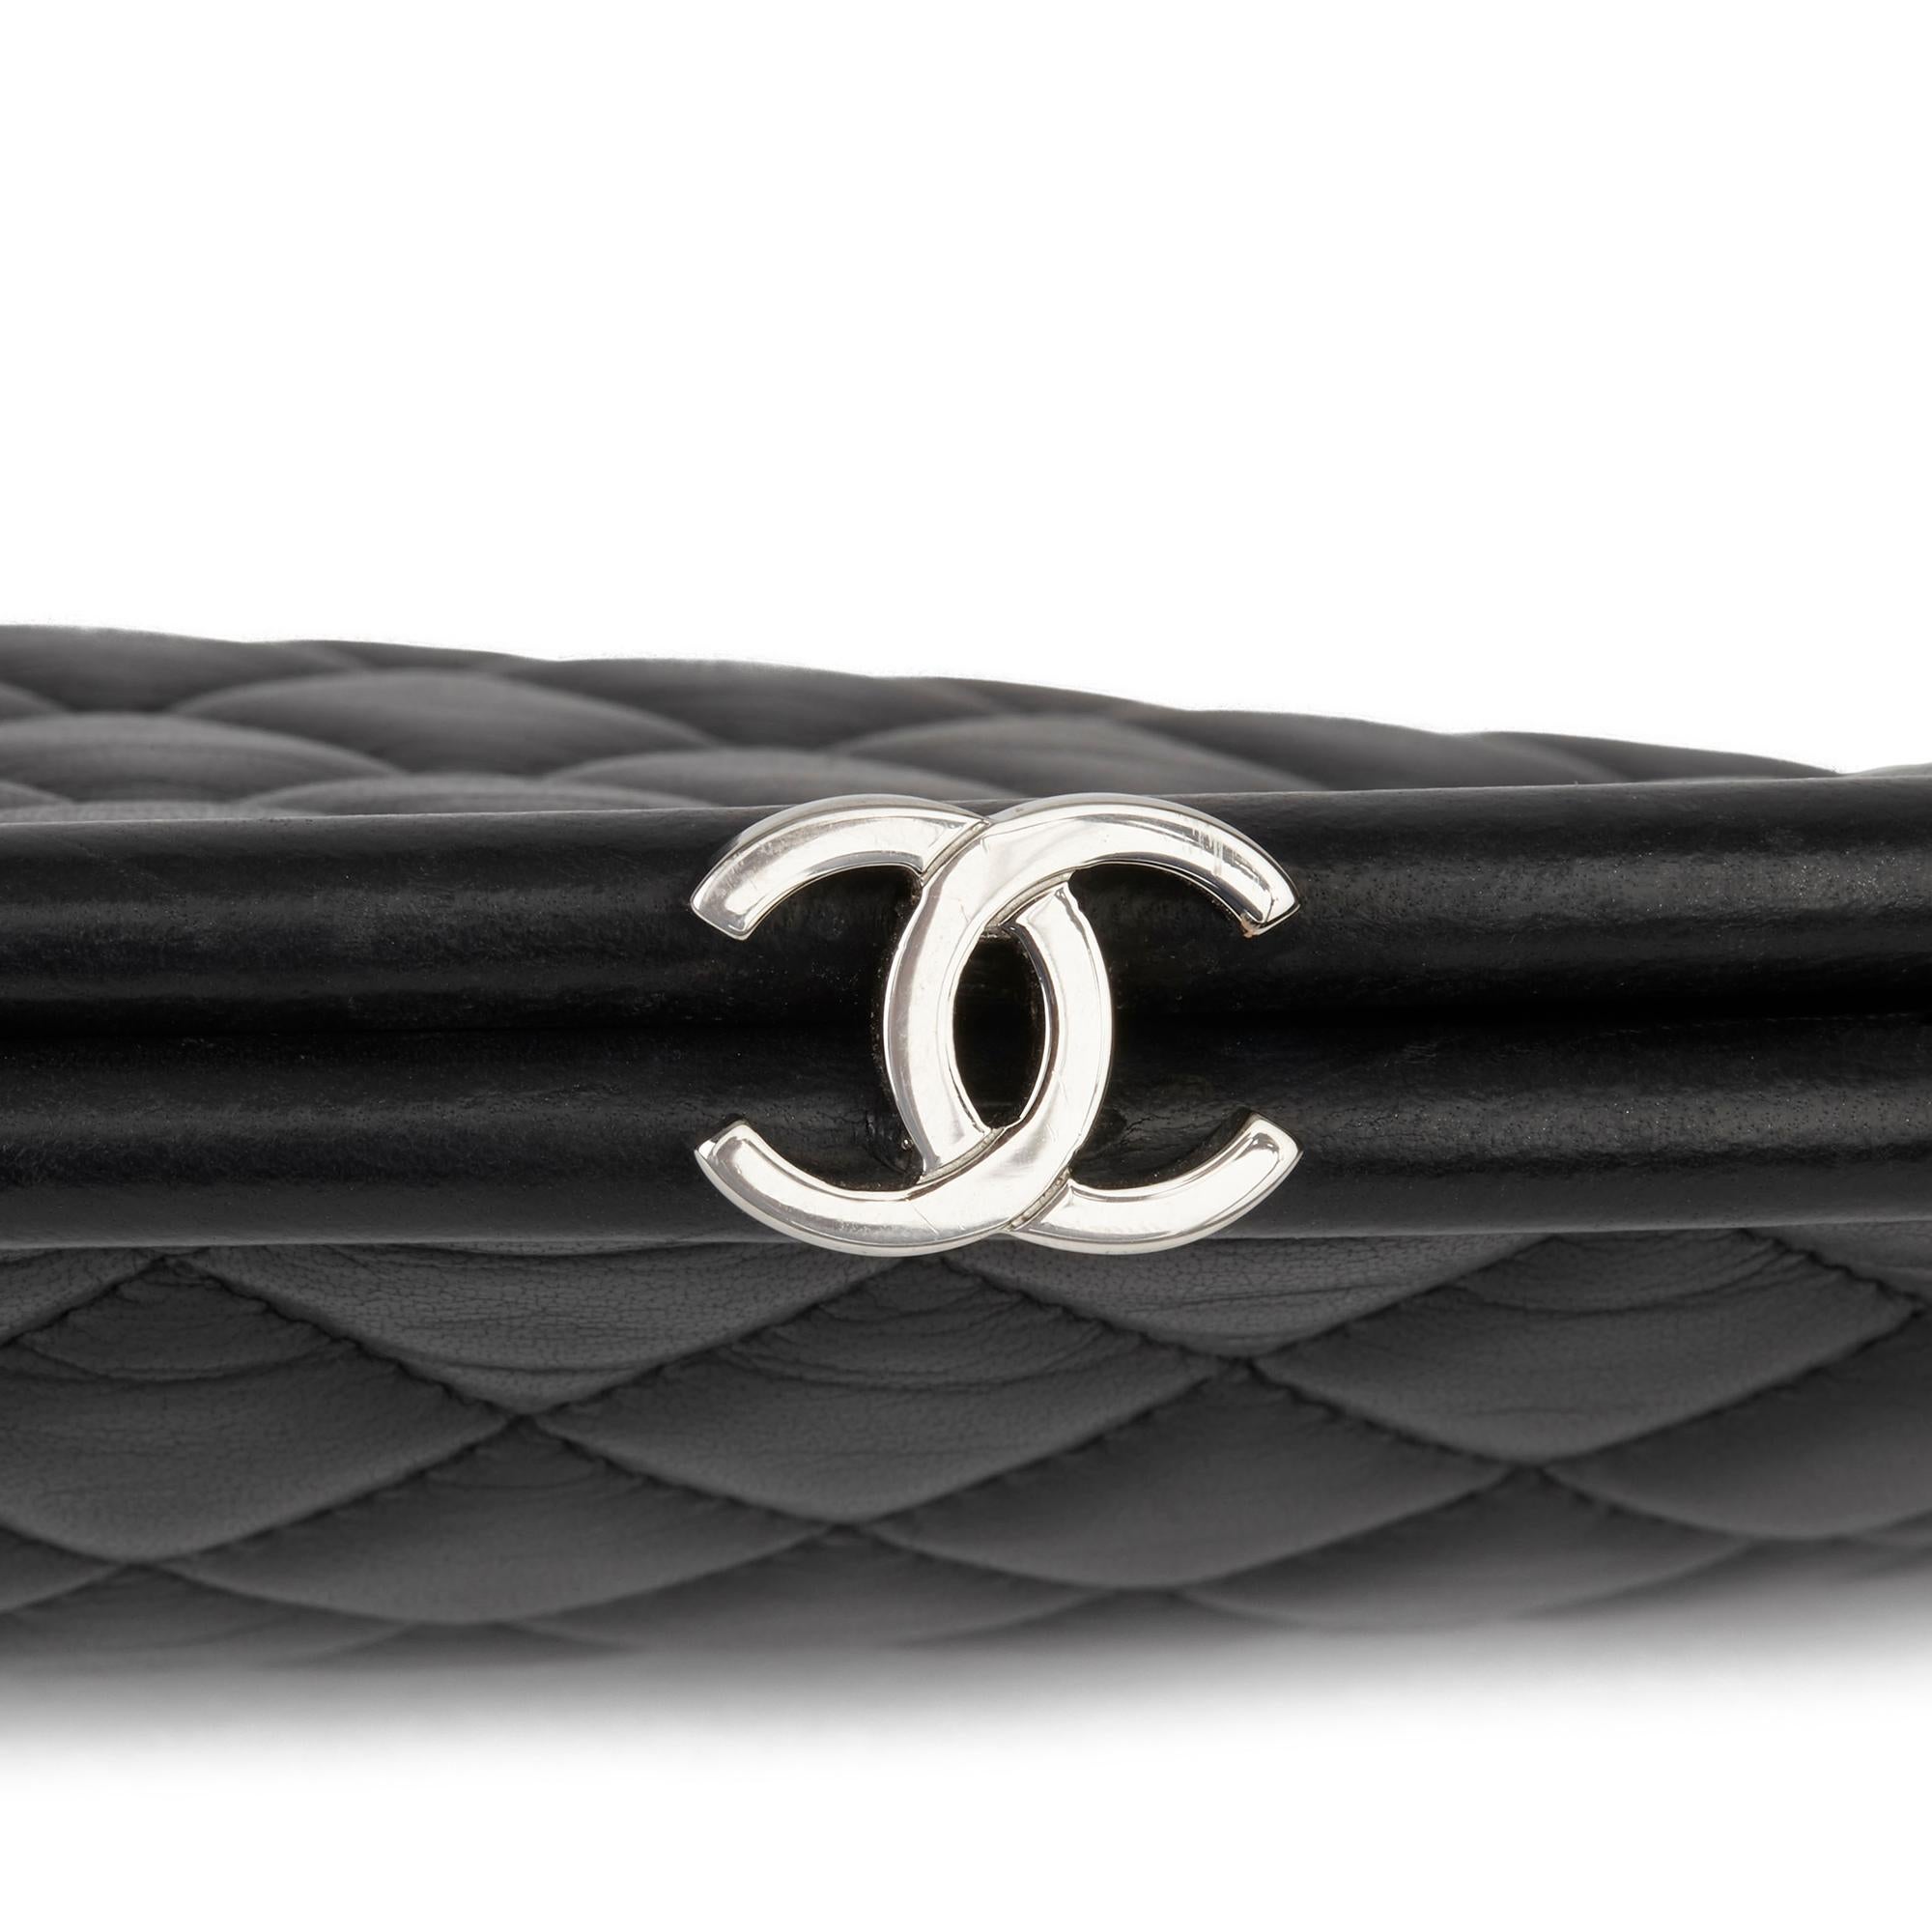 2006 Chanel Black Quilted Lambskin Timeless Clutch Bag  3